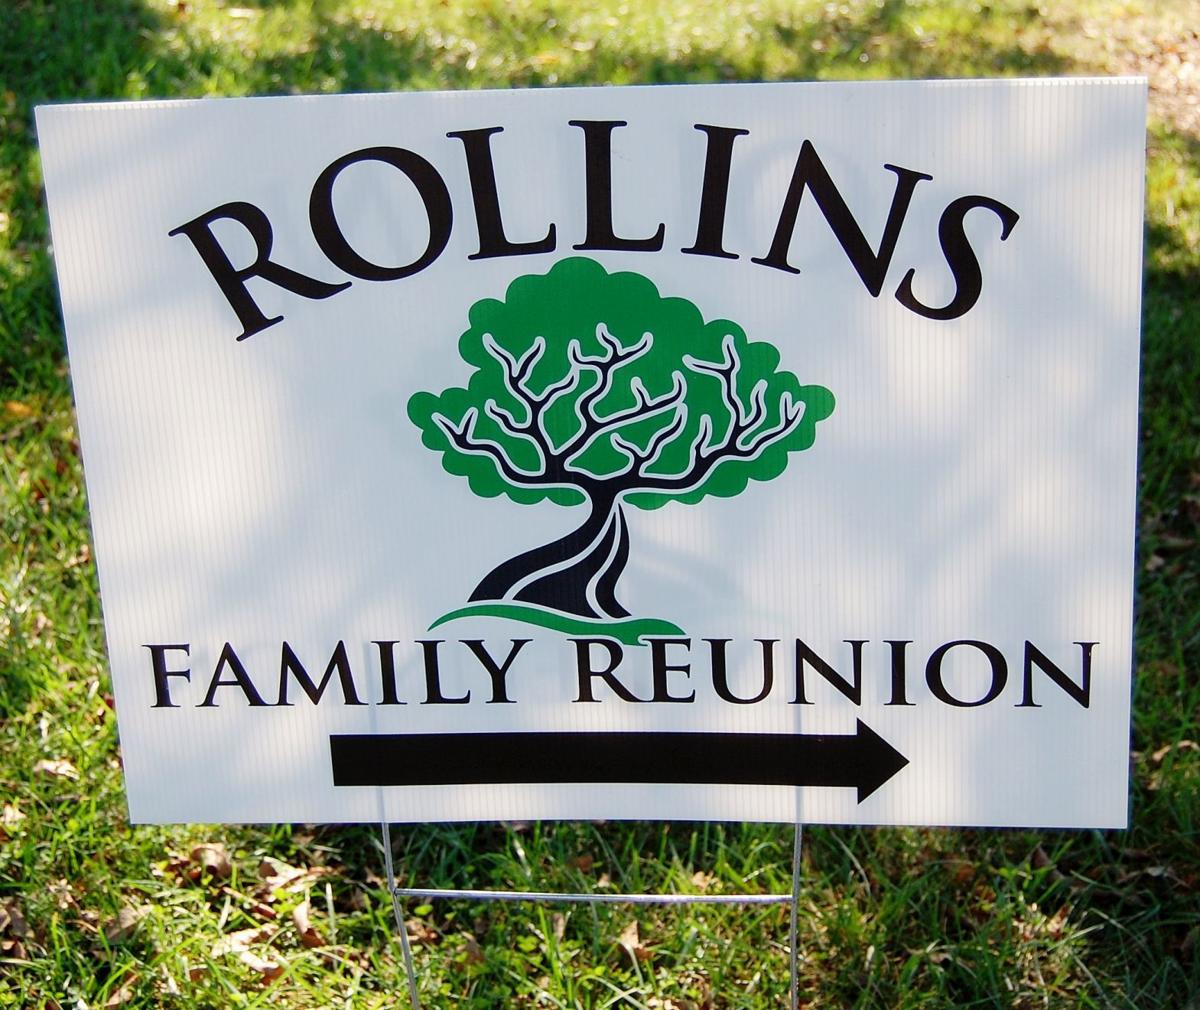 Rollins family celebrates 100 continual years of reunion Community